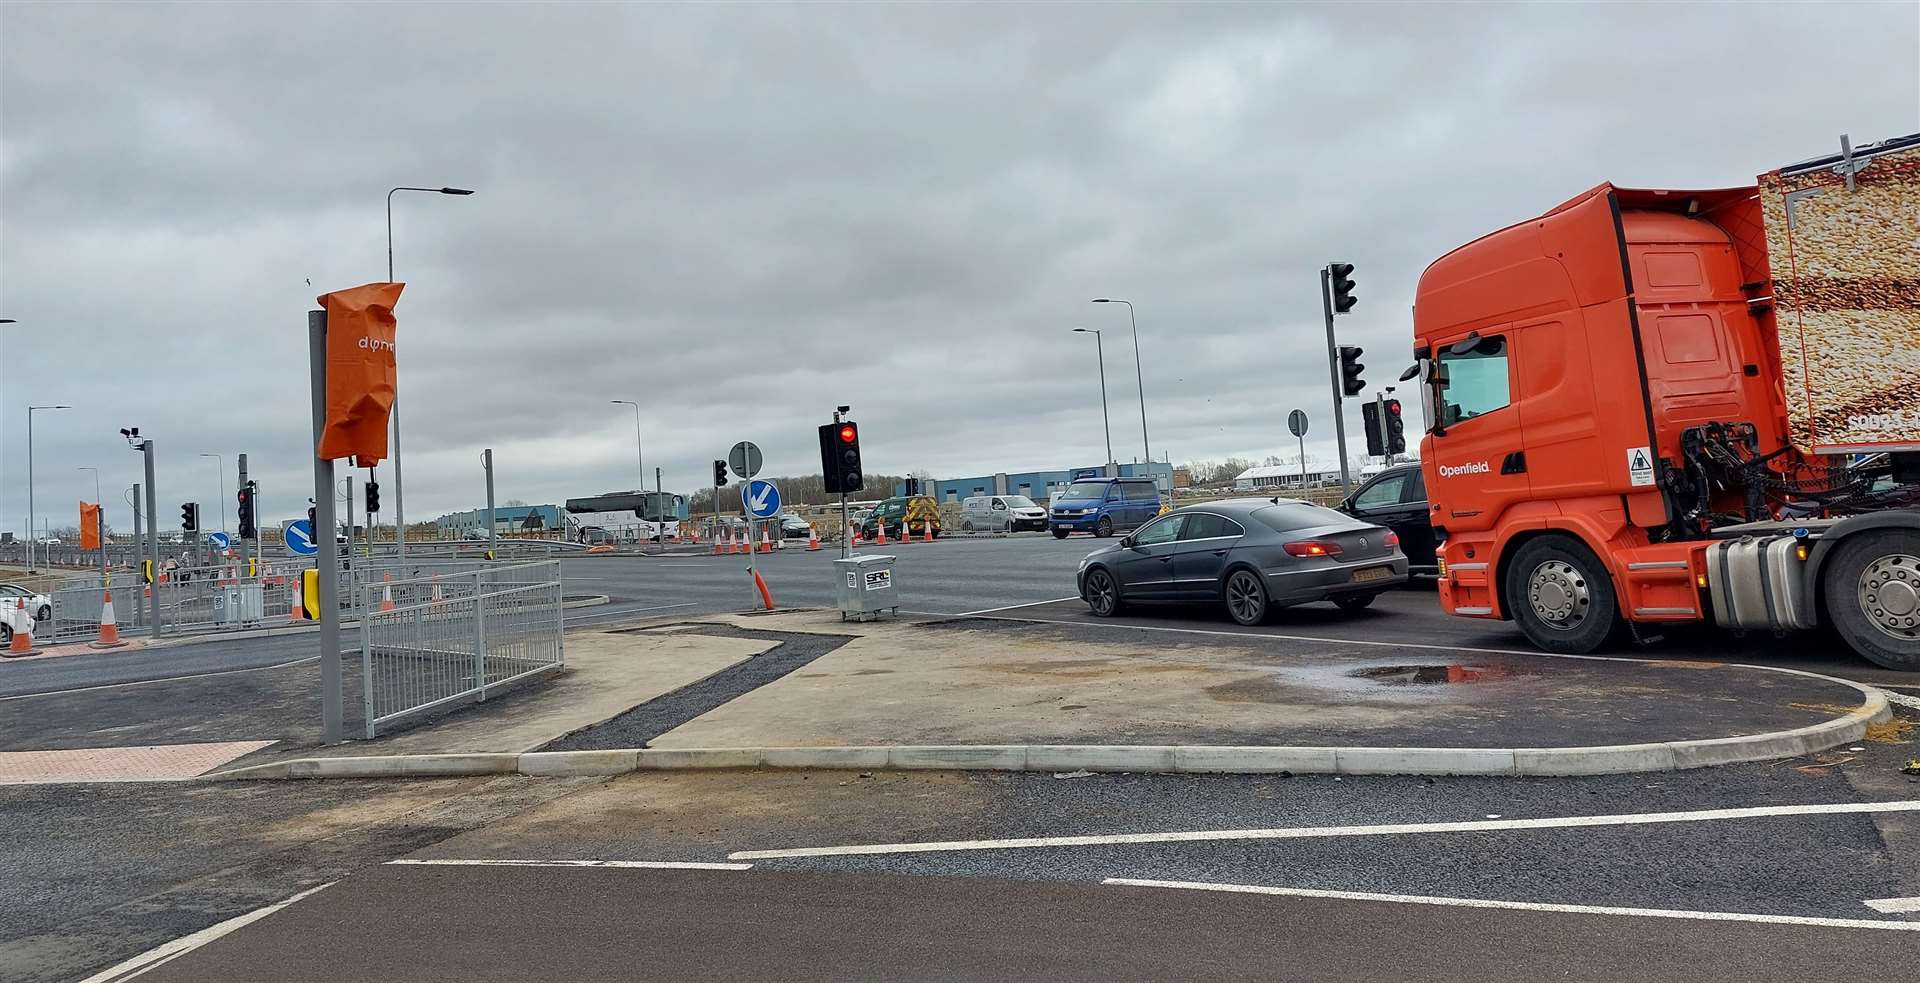 The new traffic lights have been installed but are yet to be turned on